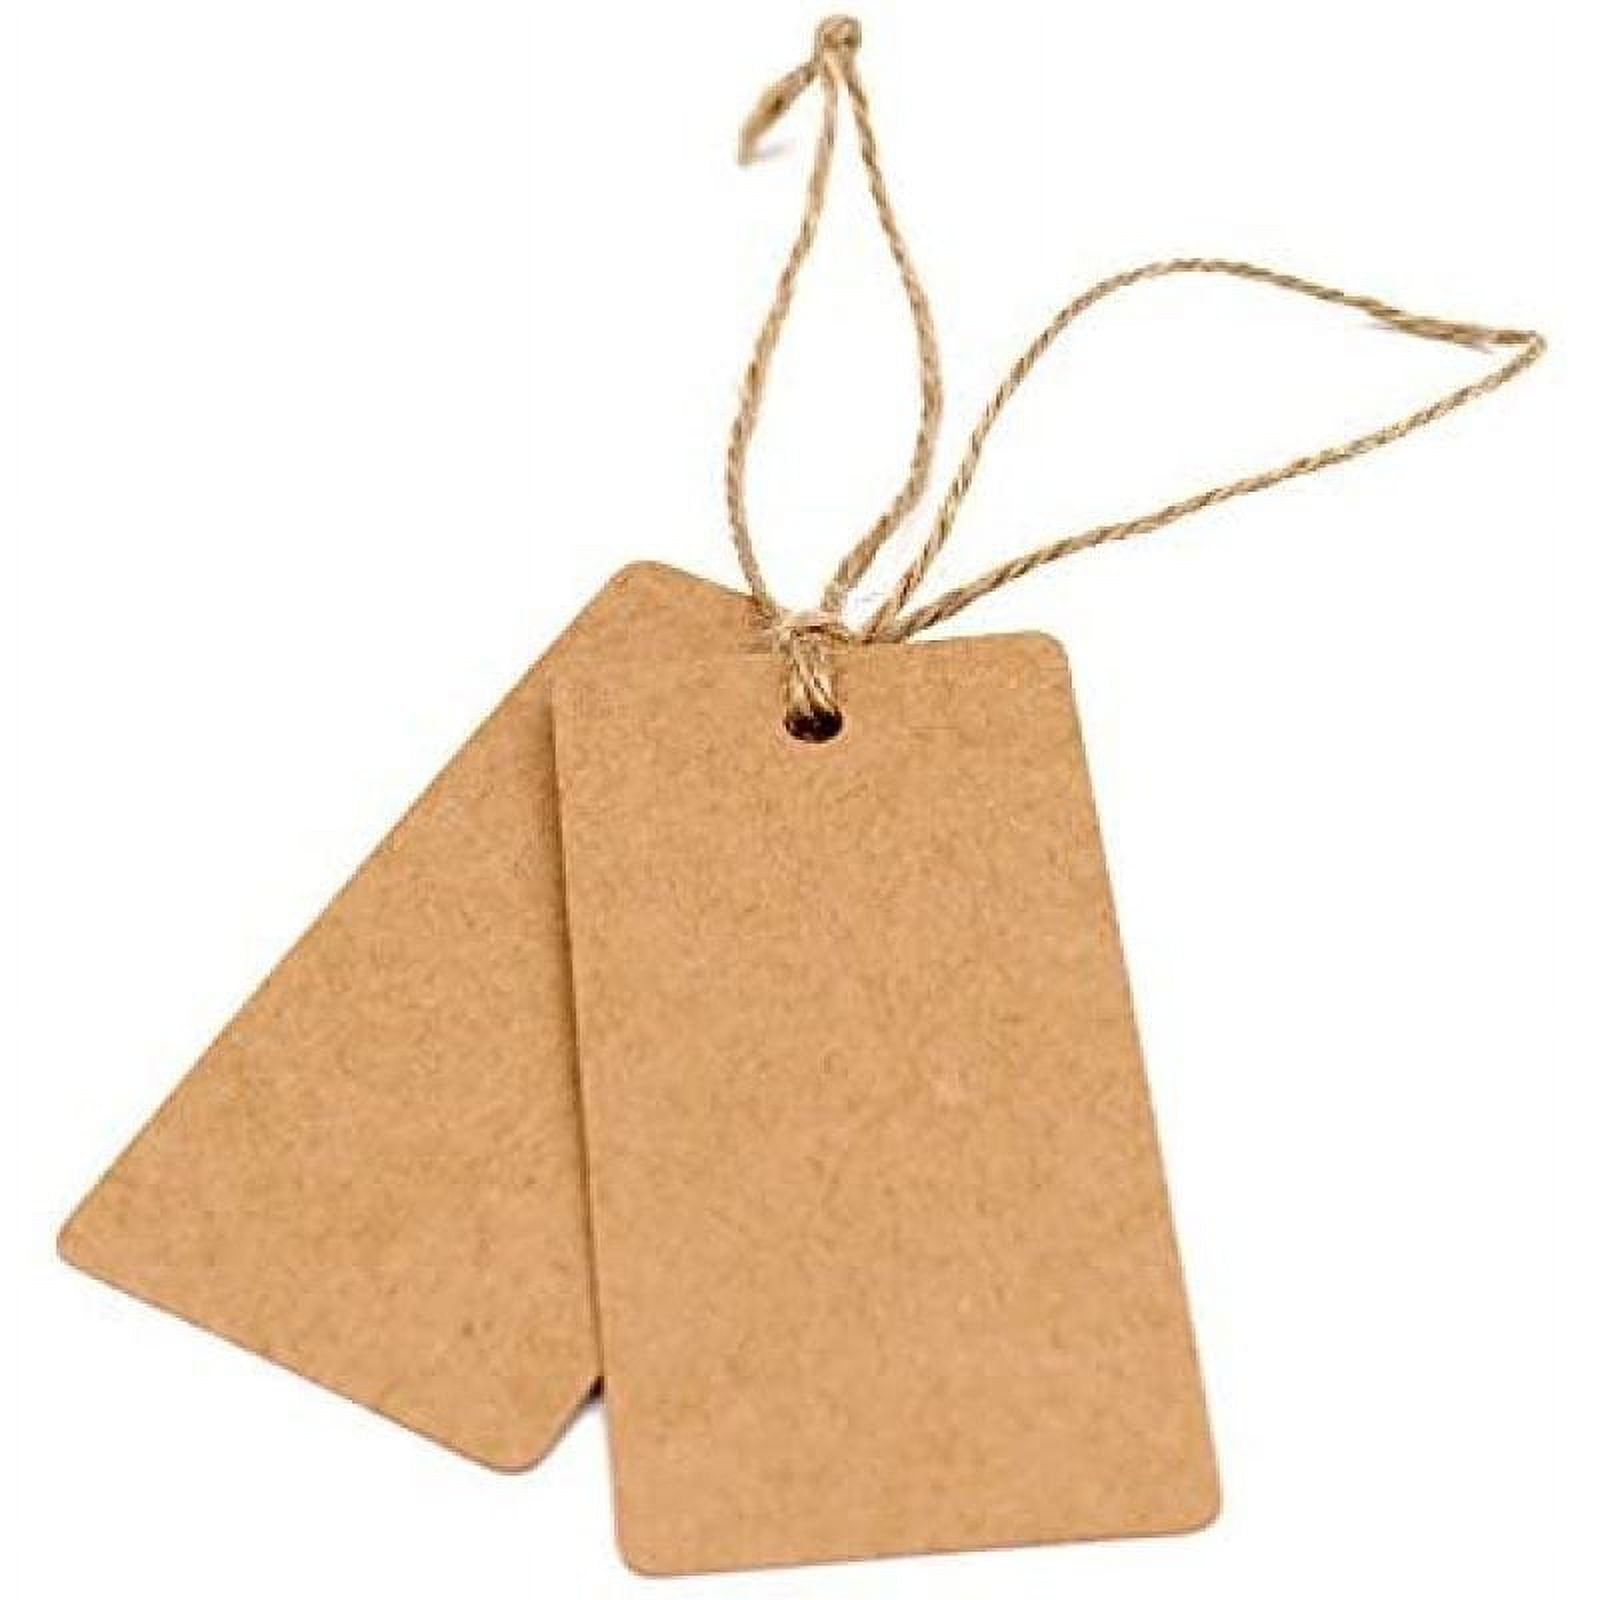 Gift Tags,100 Pcs White Paper Blank Gift Tags with String for Wedding  Favors,Craft Tags with Natural Jute Twine Polygon